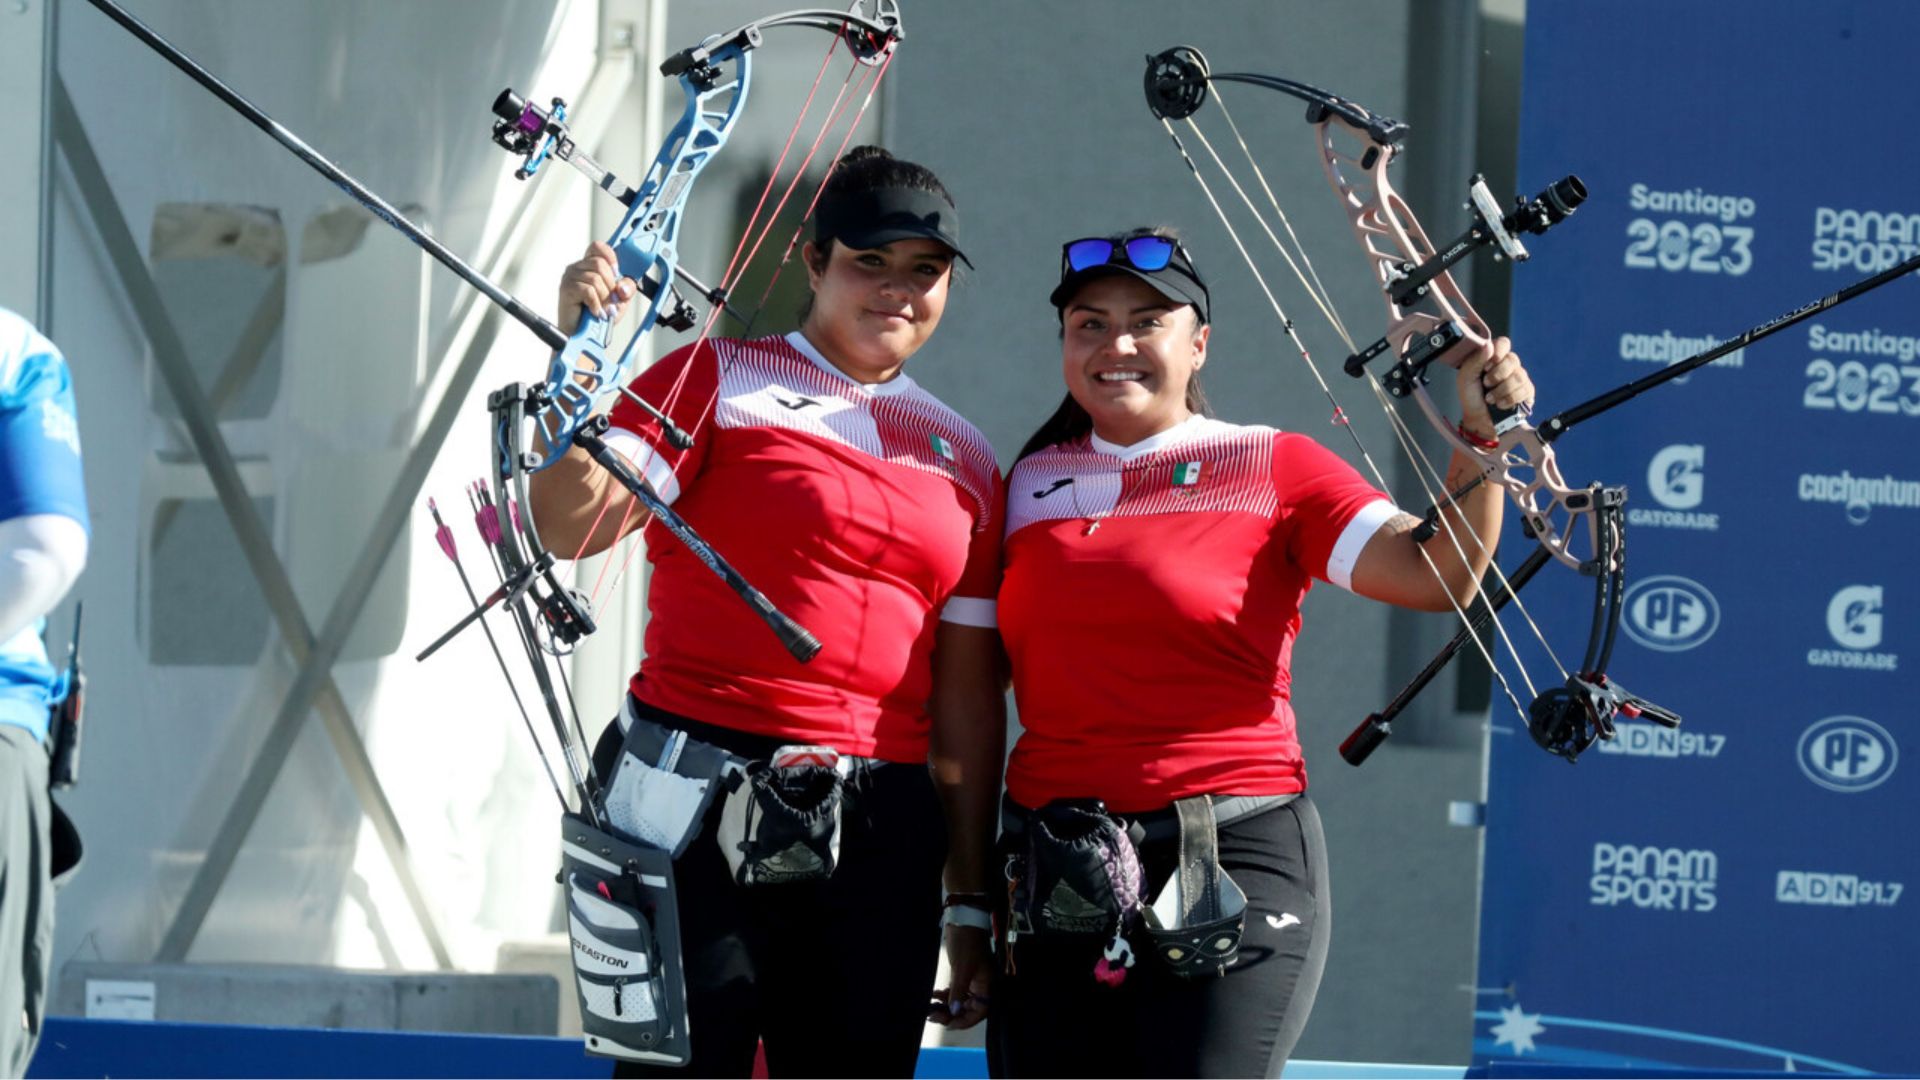 Mexican Archer Defeats World's Best and Goes For Gold in Archery